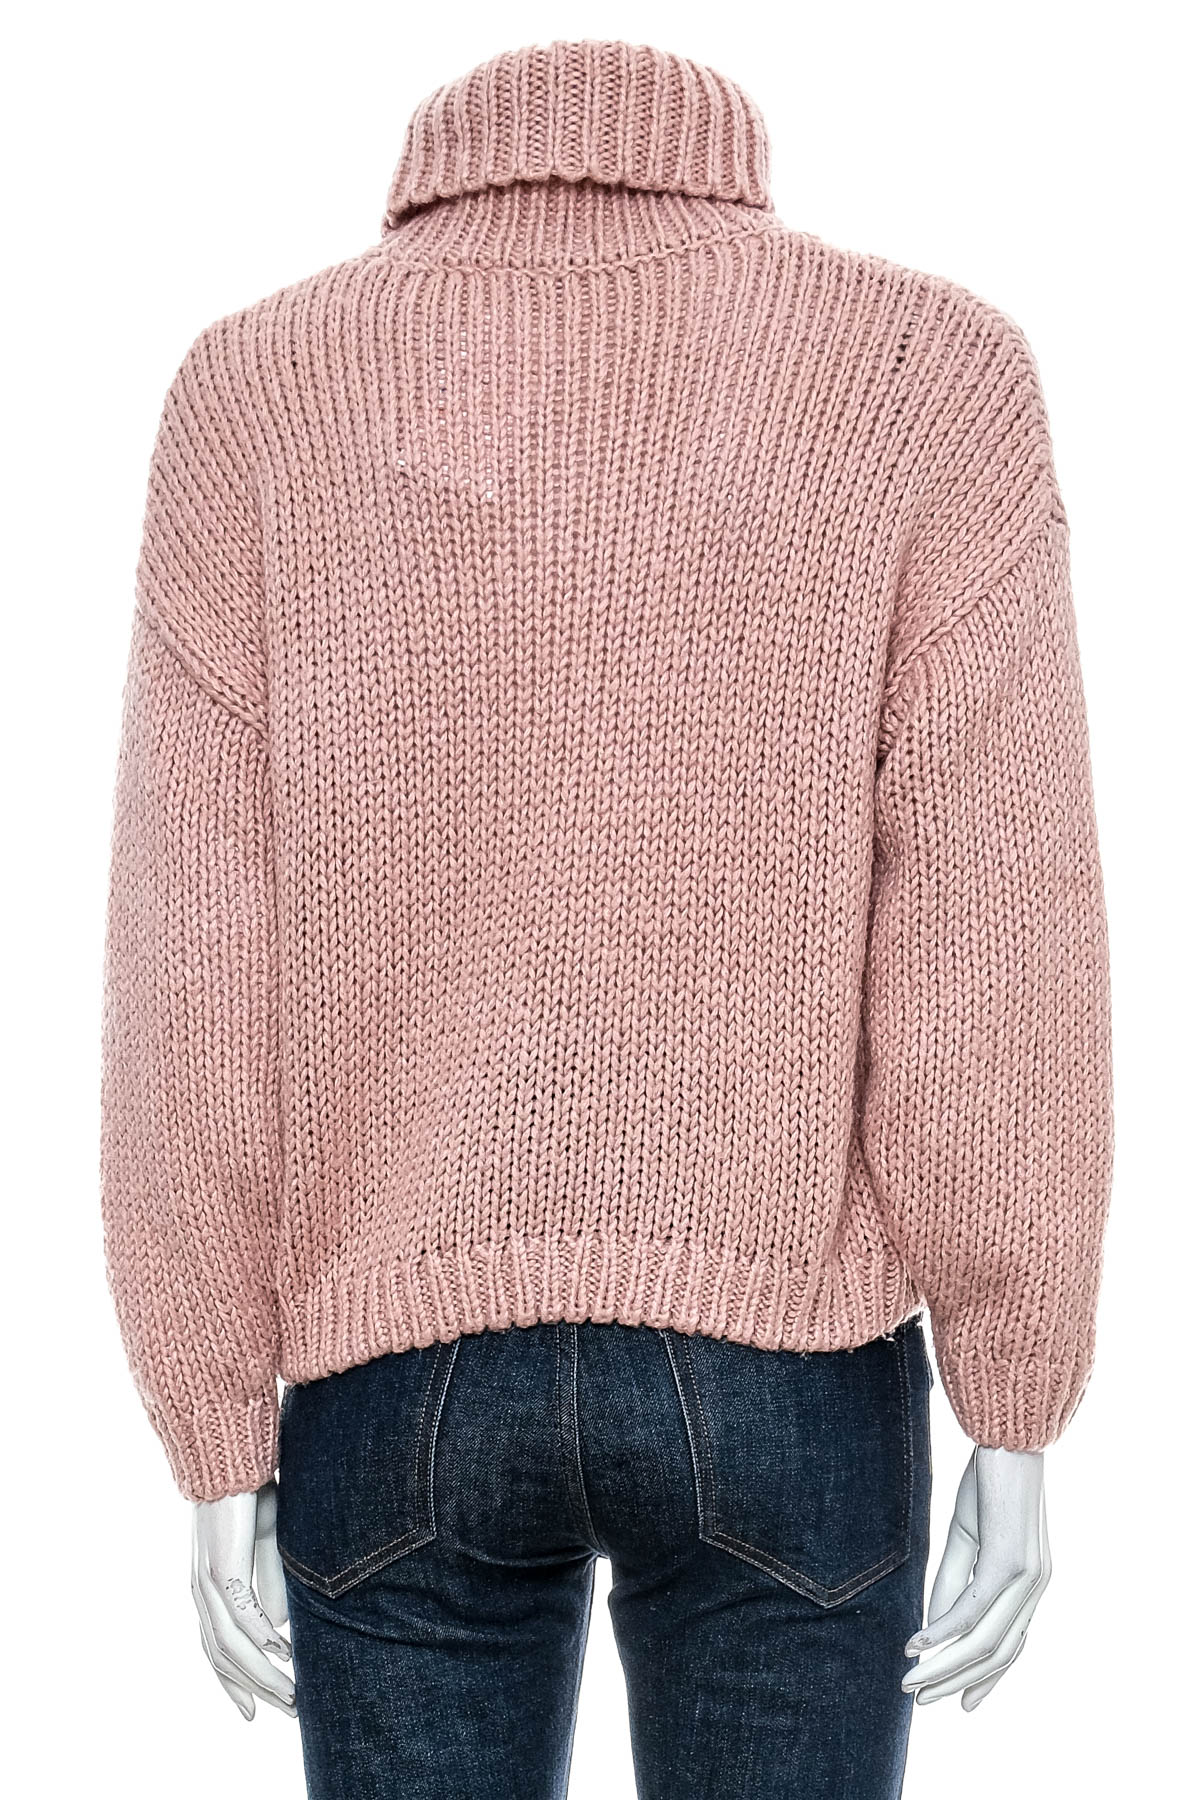 Women's sweater - DIVIDED - 1